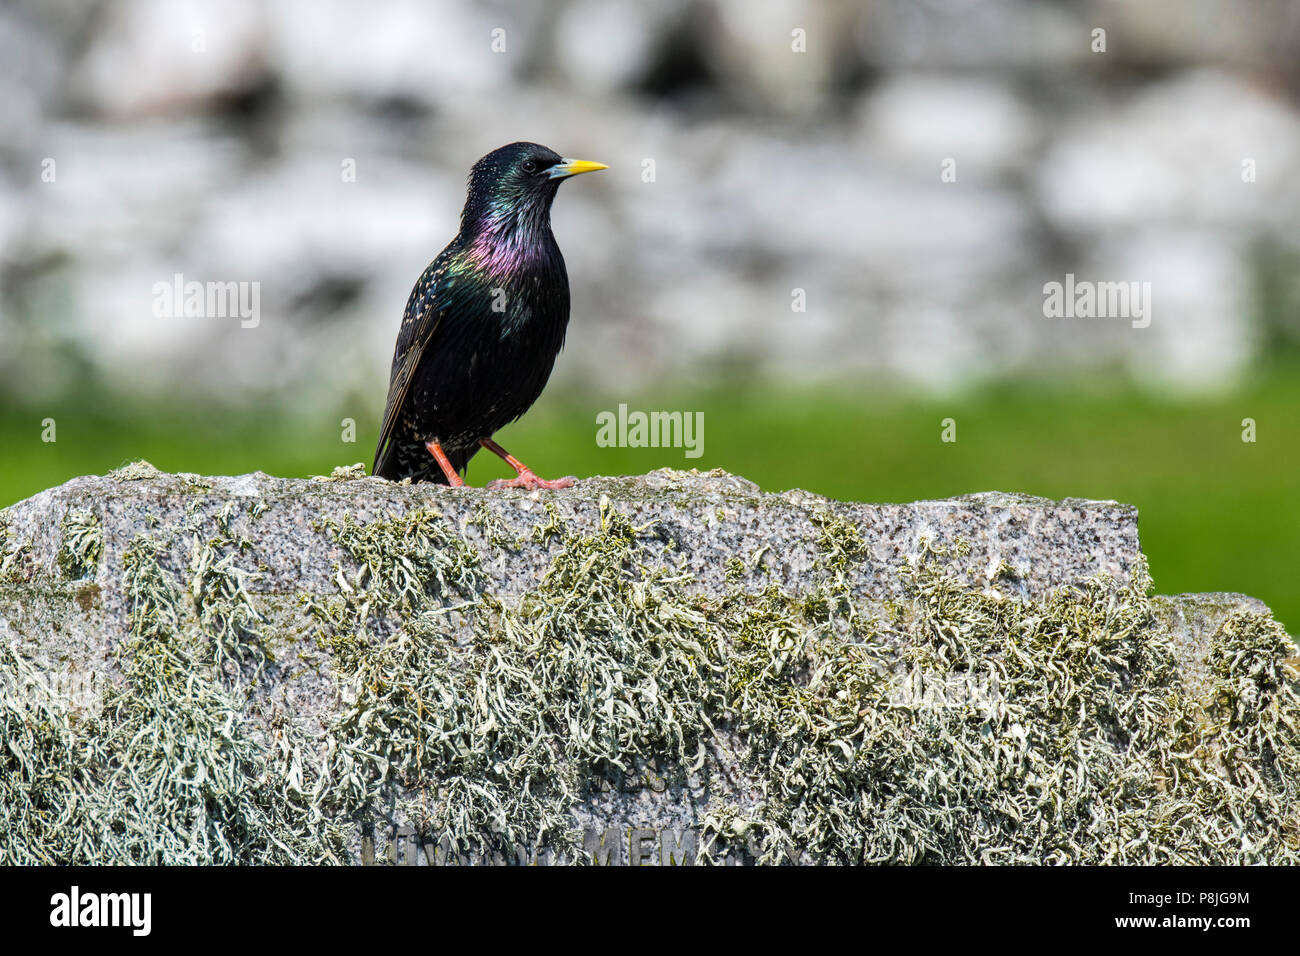 Common starling / European starling (Sturnus vulgaris) perched on tombstone / headstone covered in lichen at Scottish cemetery, Scotland, UK Stock Photo